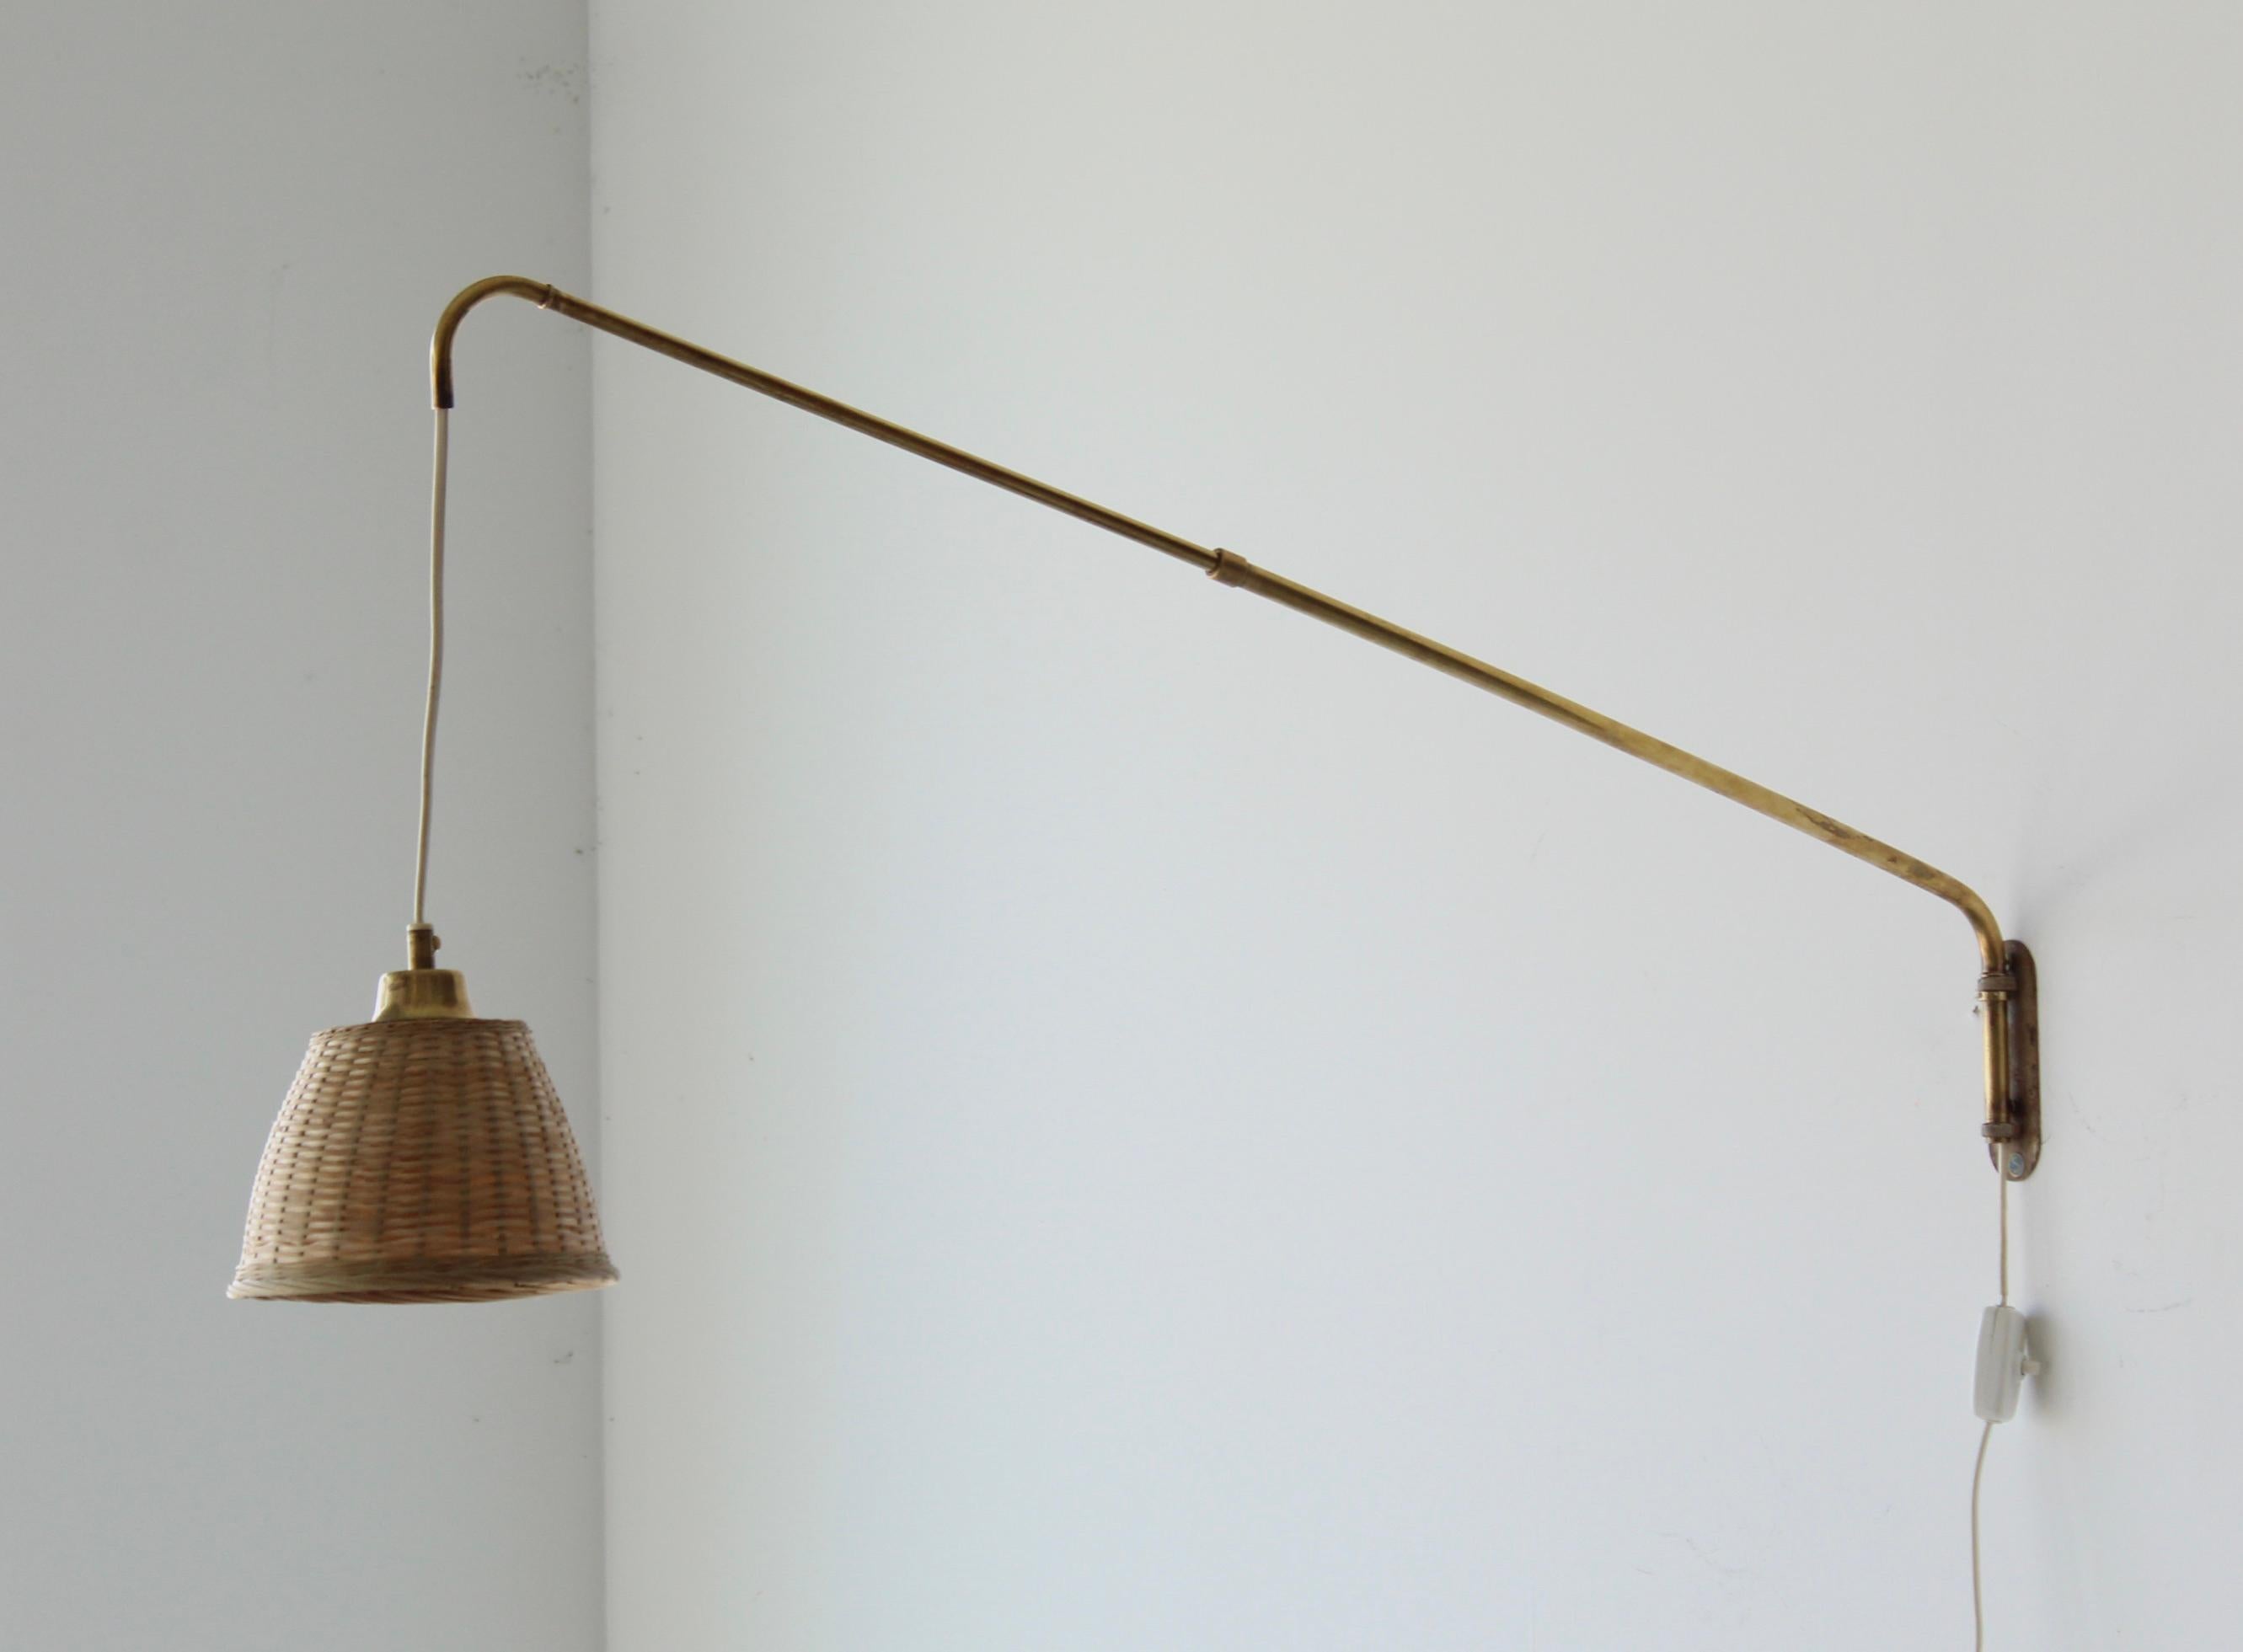 A functionalist wall light / task light, designed and produced in Sweden, 1940s-1950s. Features brass. Assorted vintage rattan lampshade. Telescopic arm.

Takes one lightbulb on E27 socket. No stated max wattage, not UL listed. Stated dimensions